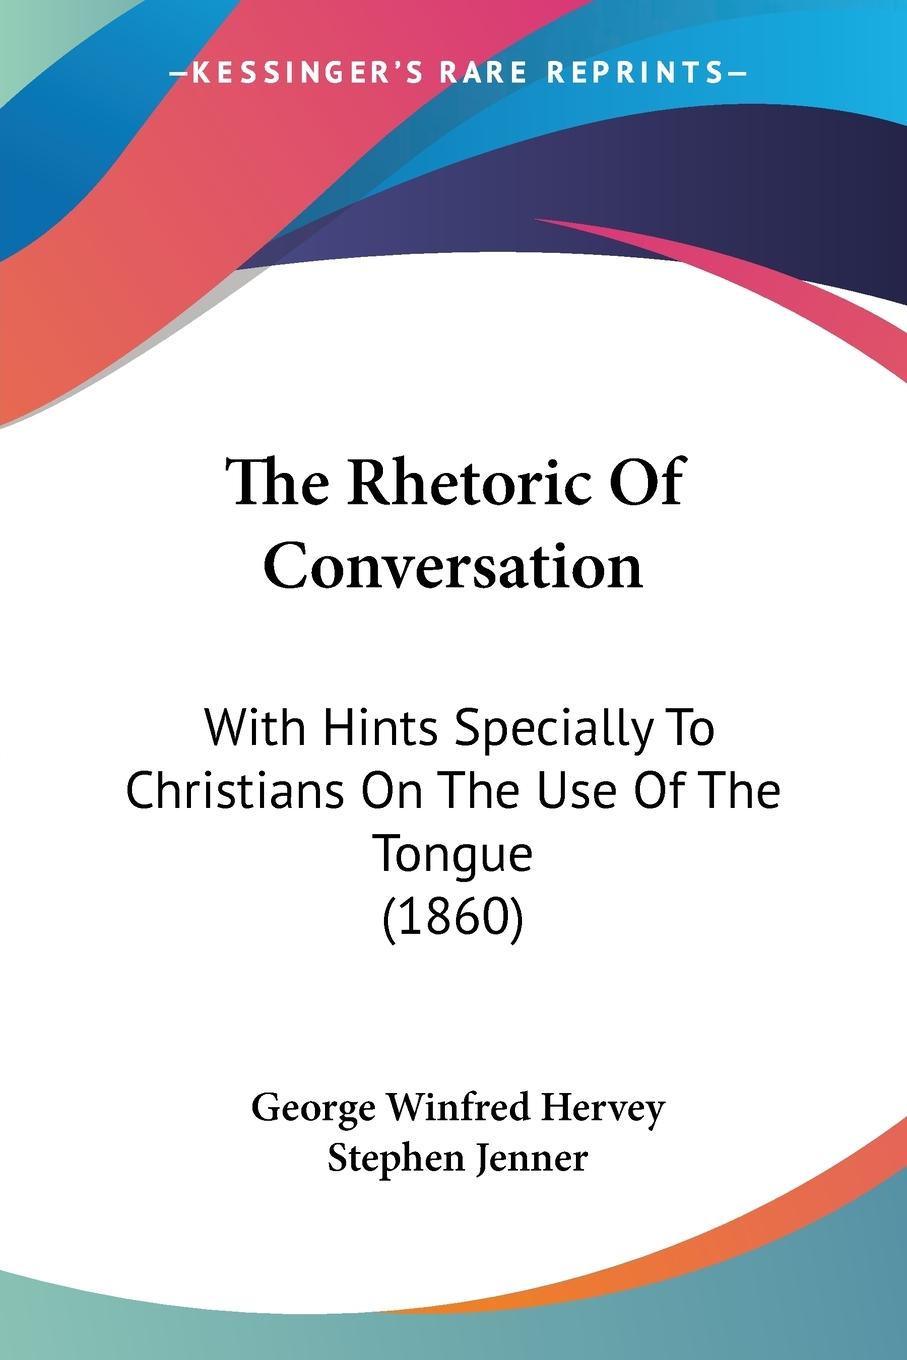 The Rhetoric Of Conversation: With Hints Specially To Christians On The Use Of The Tongue (1860)